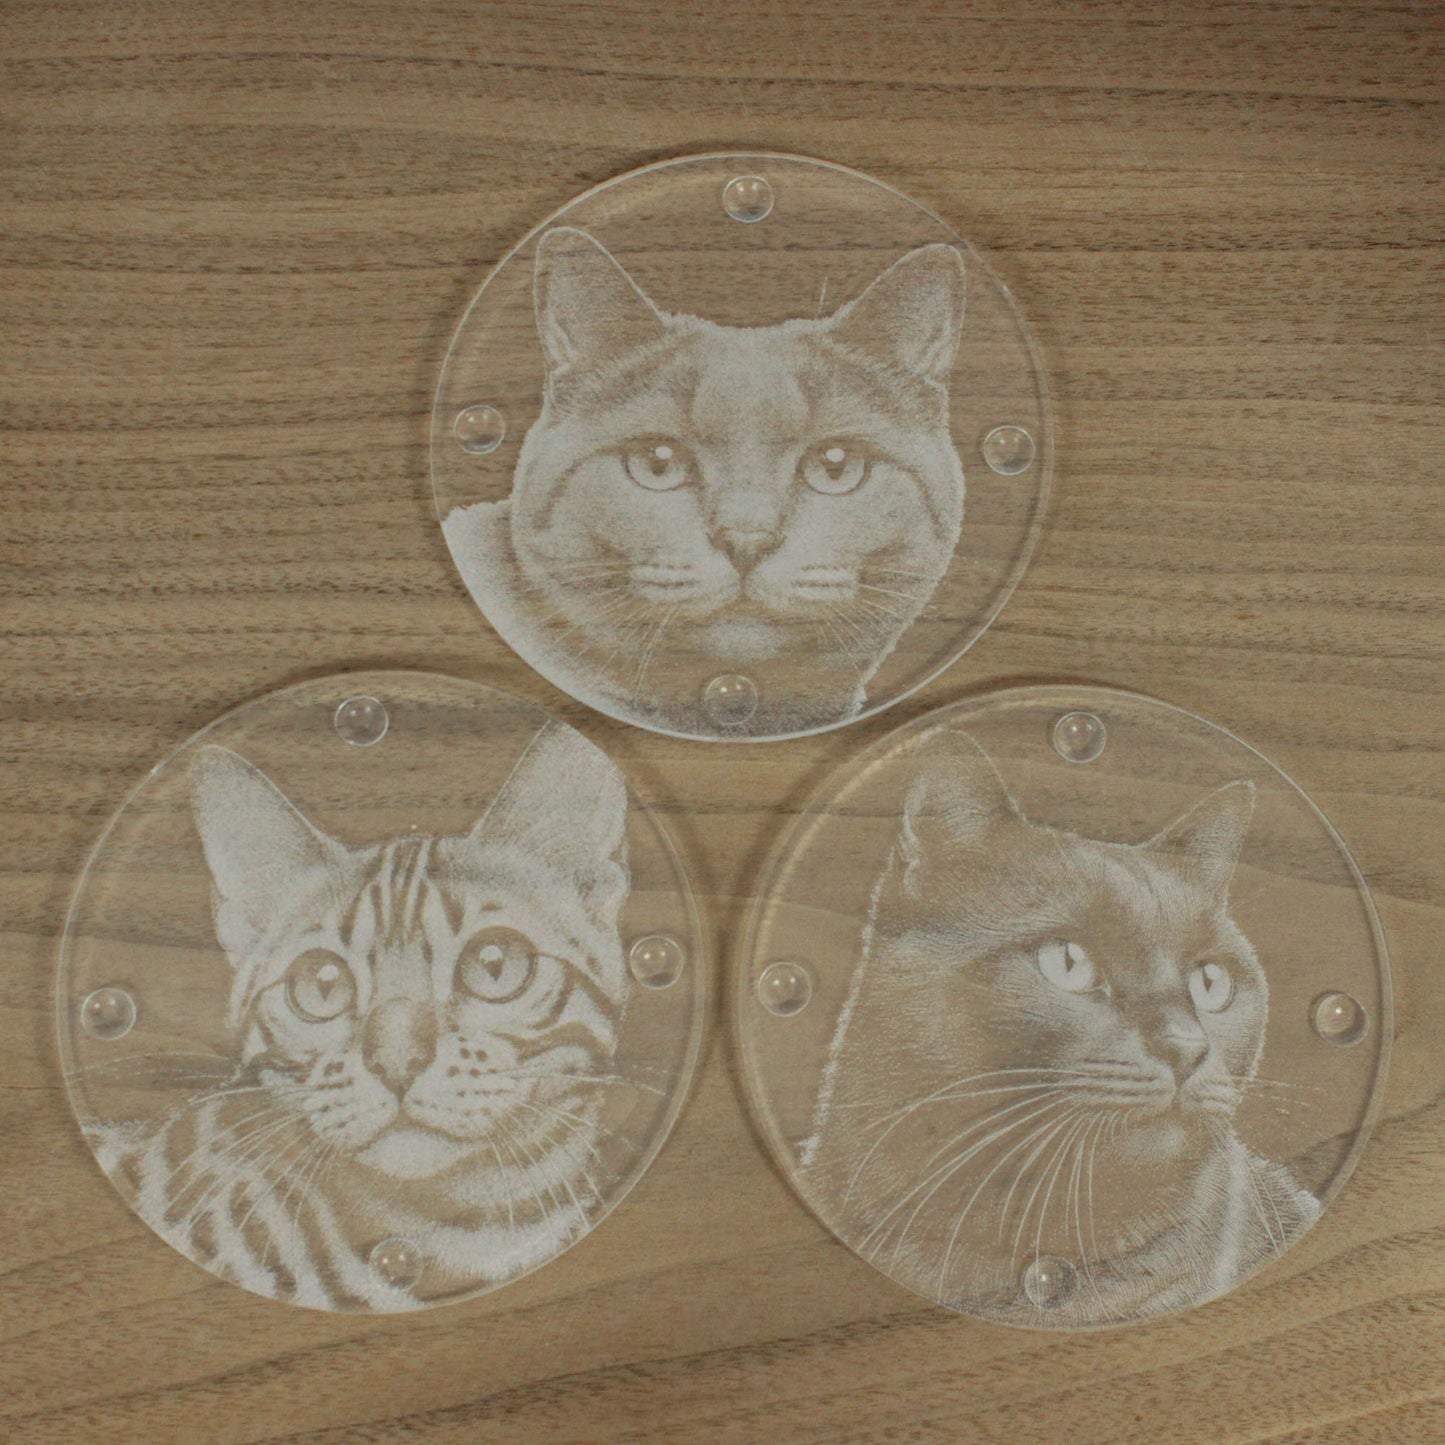 Gift Packed Set of 6 Engraved Acrylic Coasters - Cats